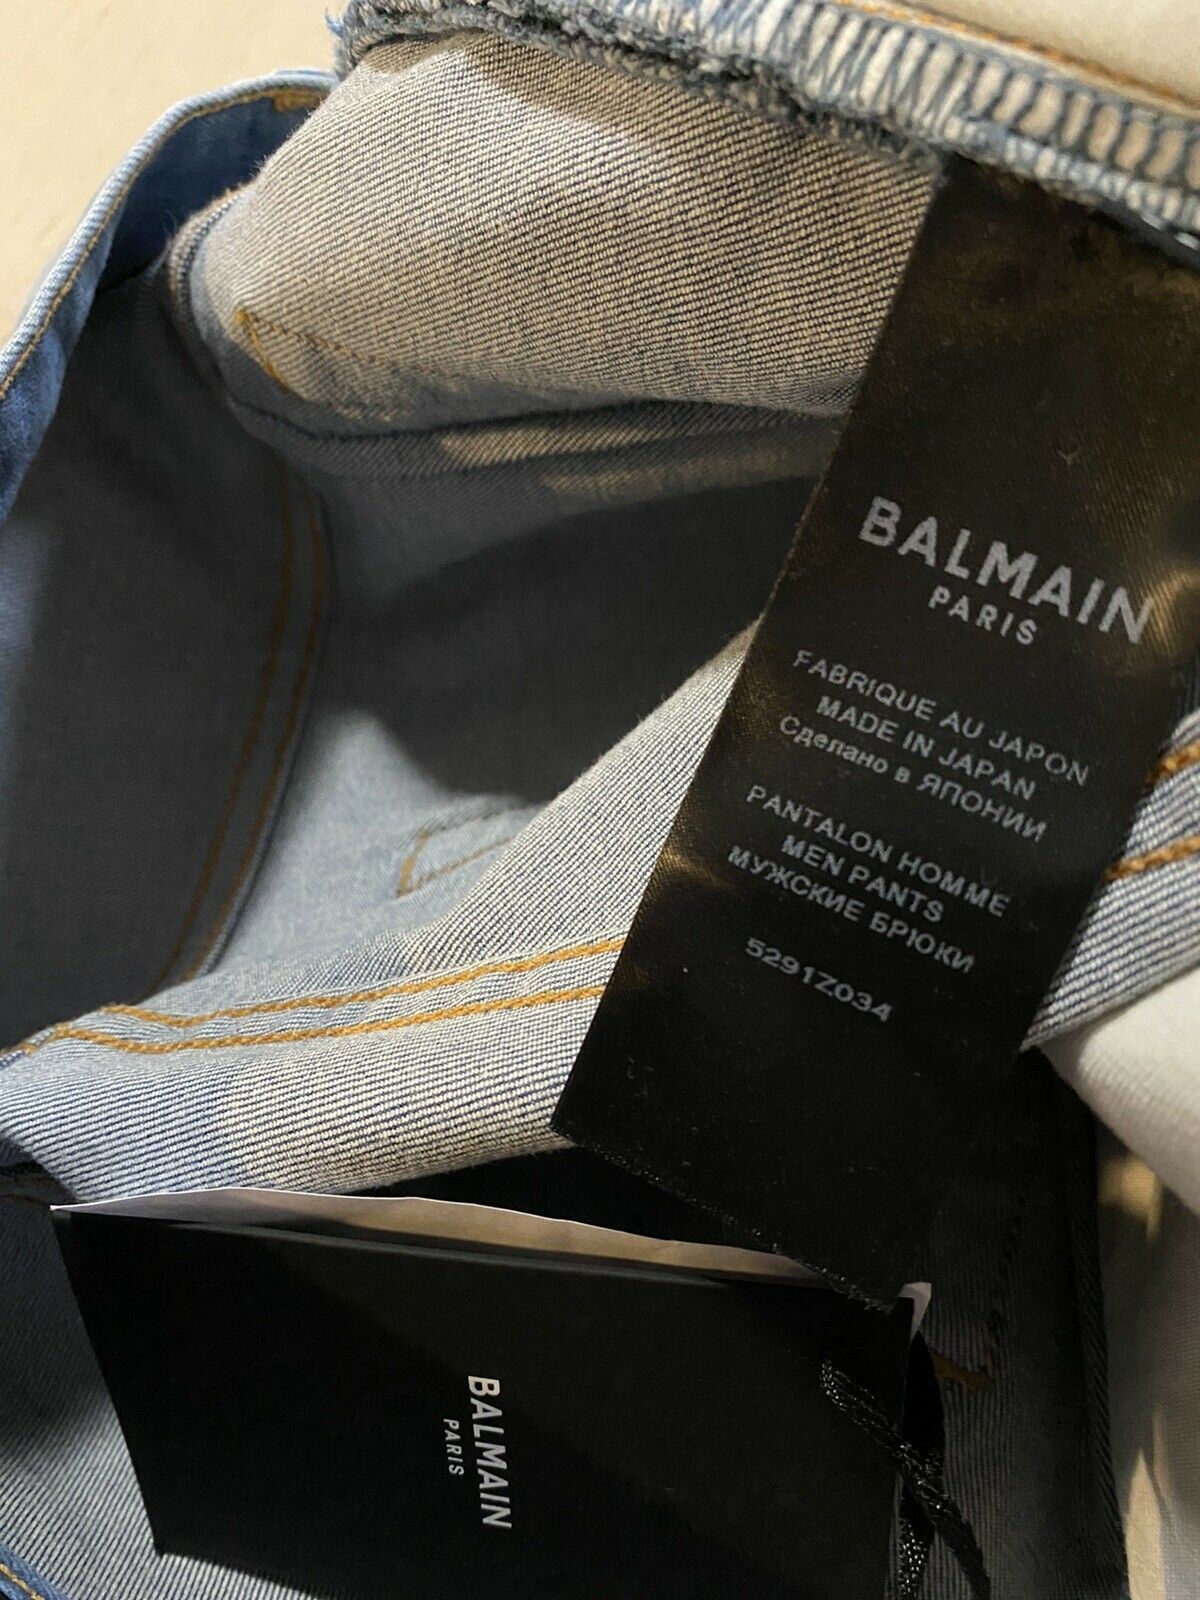 NWT $995 Balmain Men Distressed Side Tope Jeans Blue 30 ( Measured 32 )